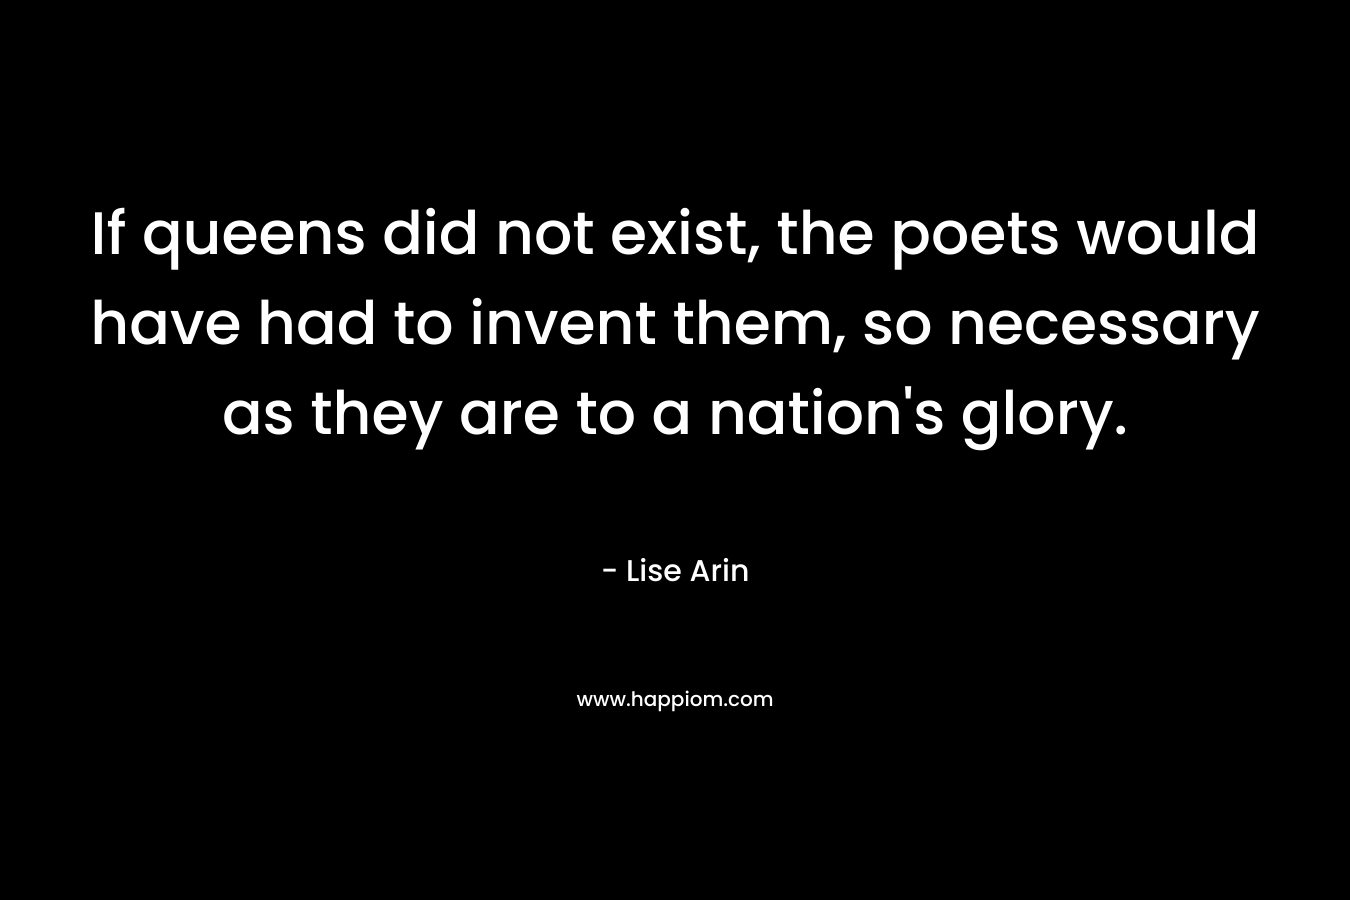 If queens did not exist, the poets would have had to invent them, so necessary as they are to a nation’s glory. – Lise Arin